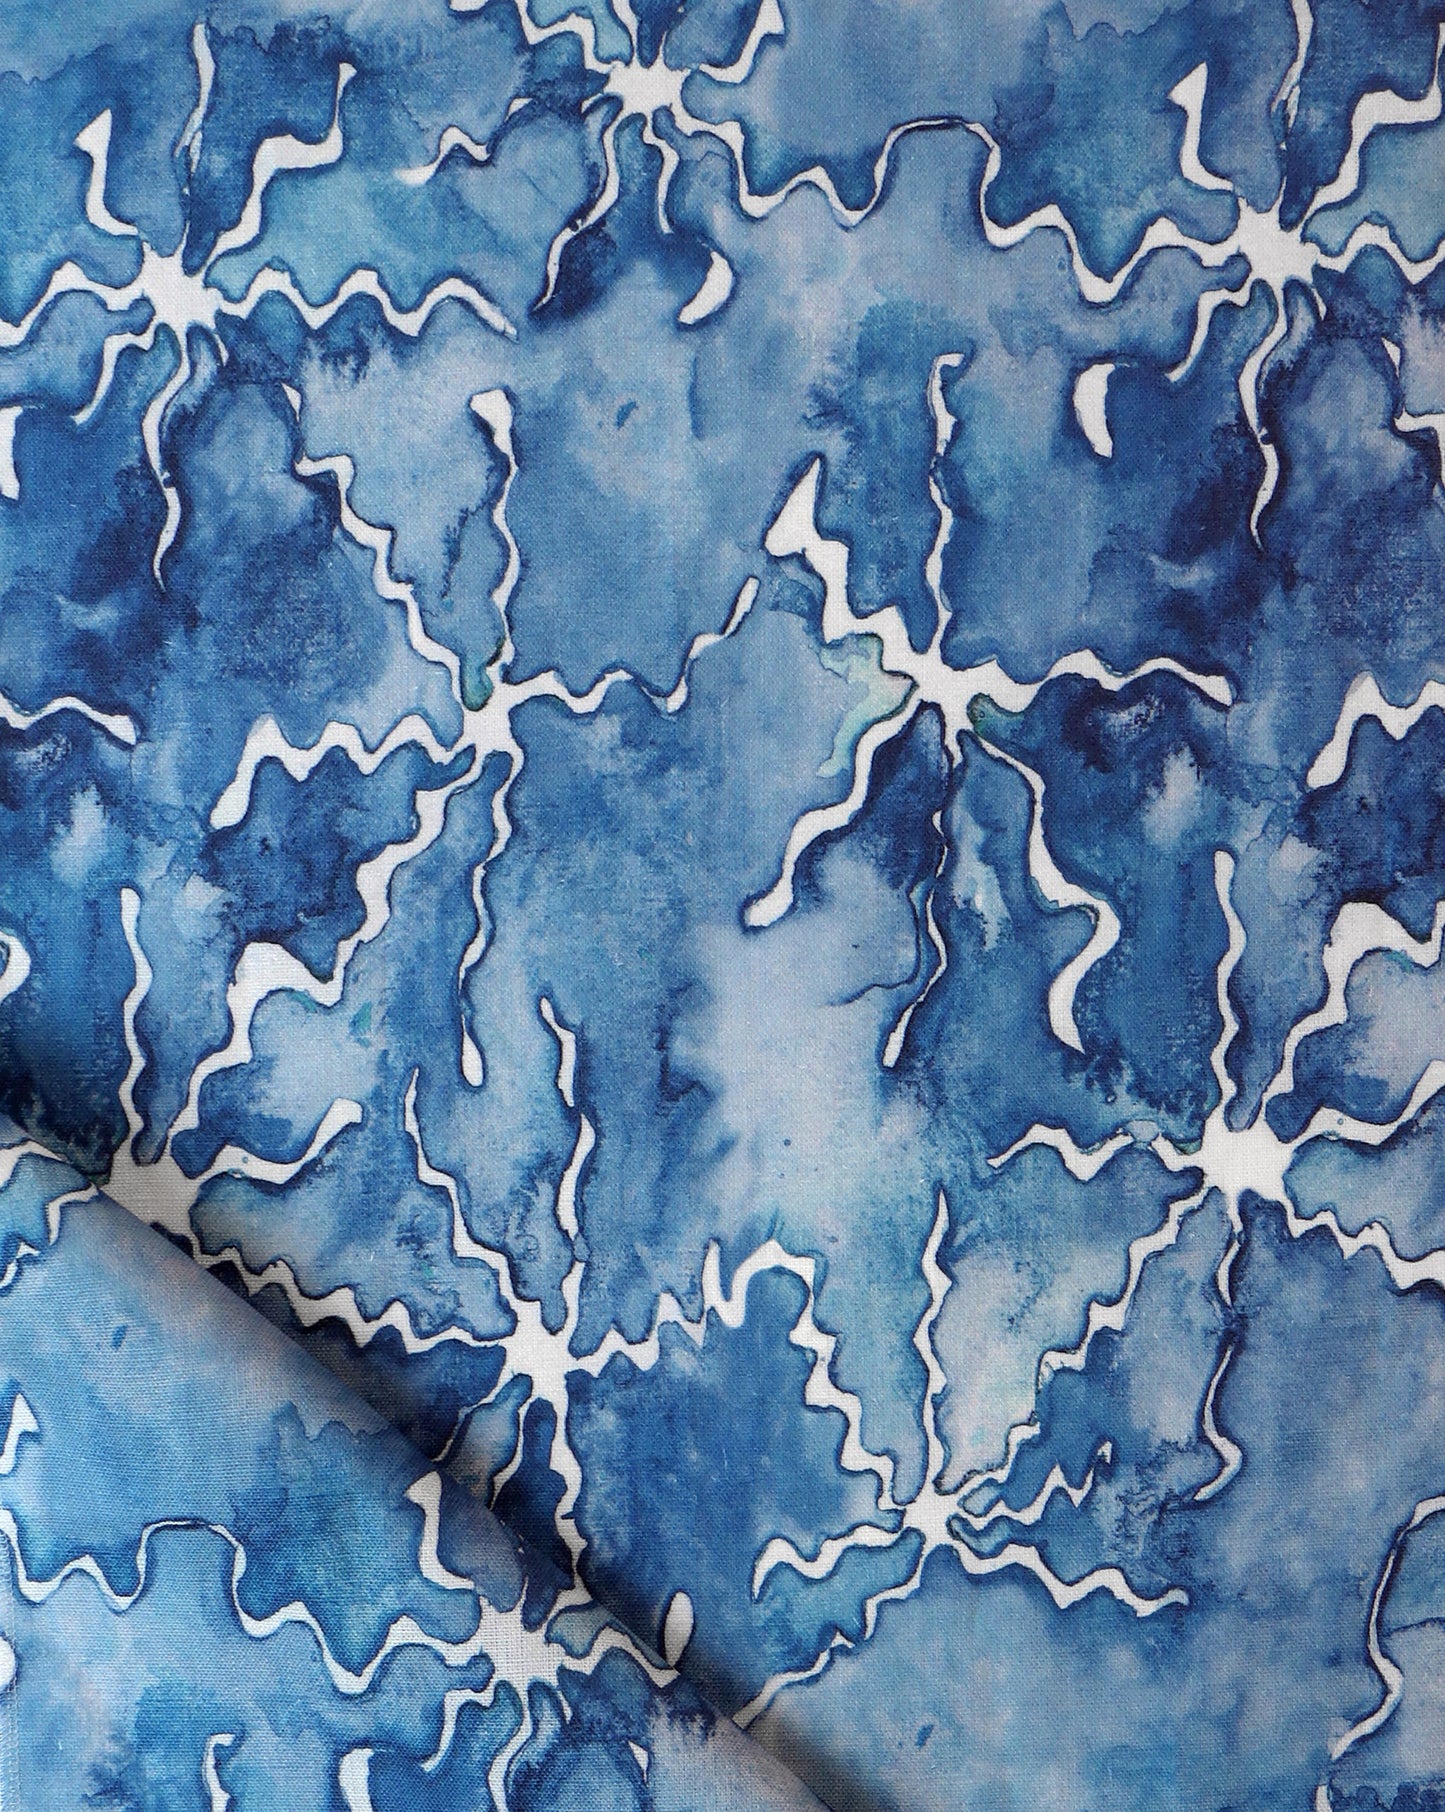 A blue and white pattern on Pecosa Fabric, using resist dye techniques for fabric design.